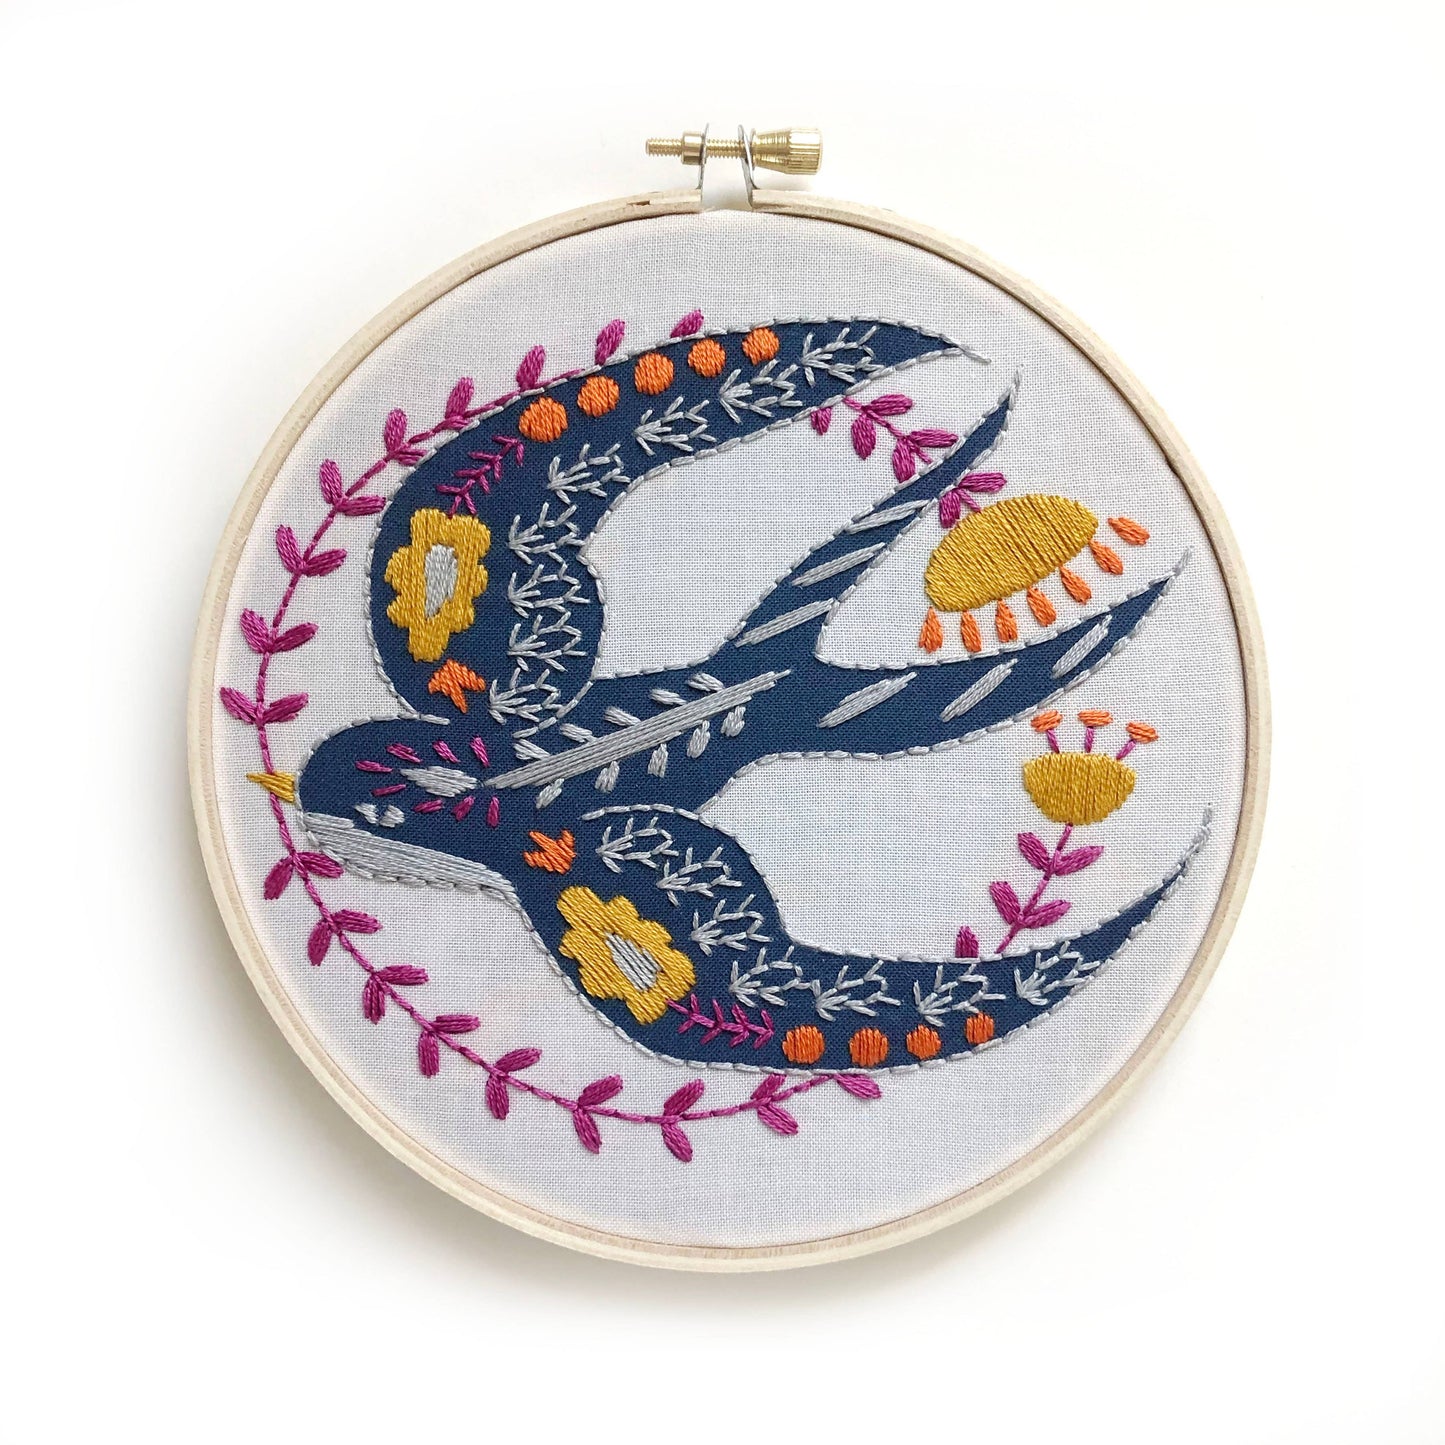 Themed Embroidery Kits